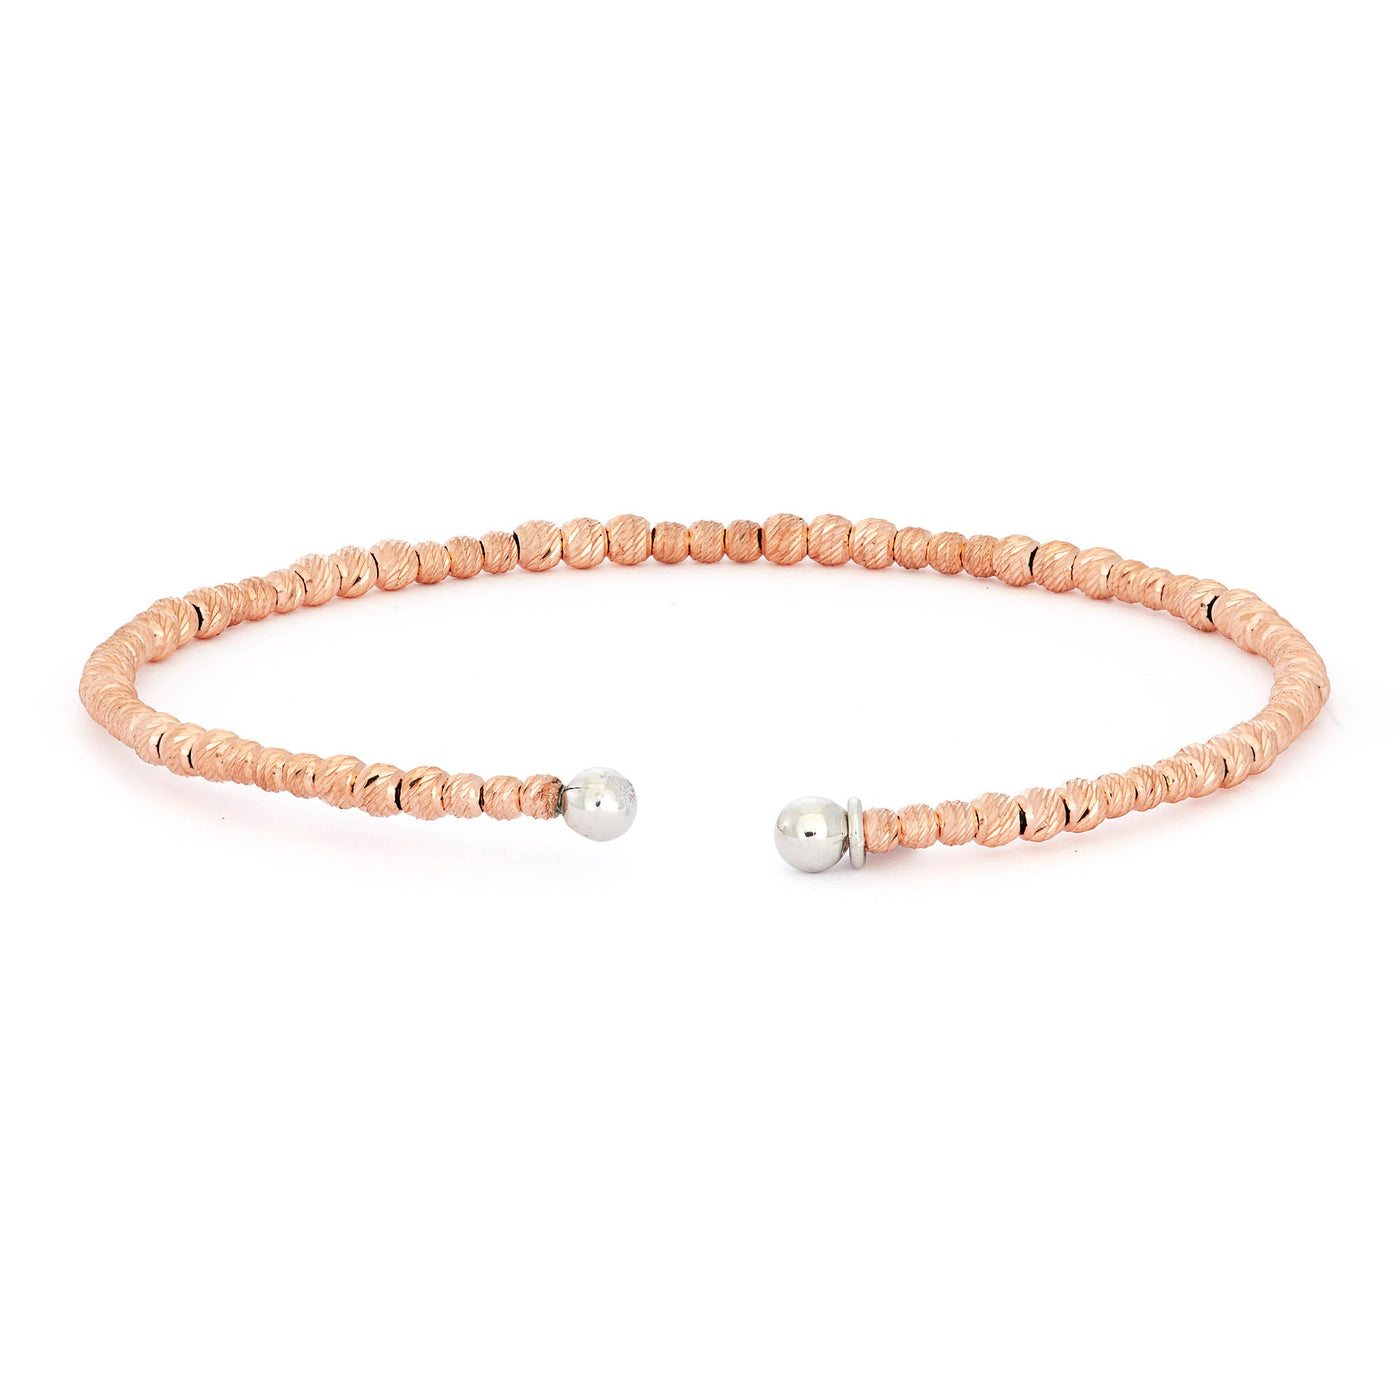 Rebecca Sloane Rose Gold Silver Bangle With Texture Faceted Beads